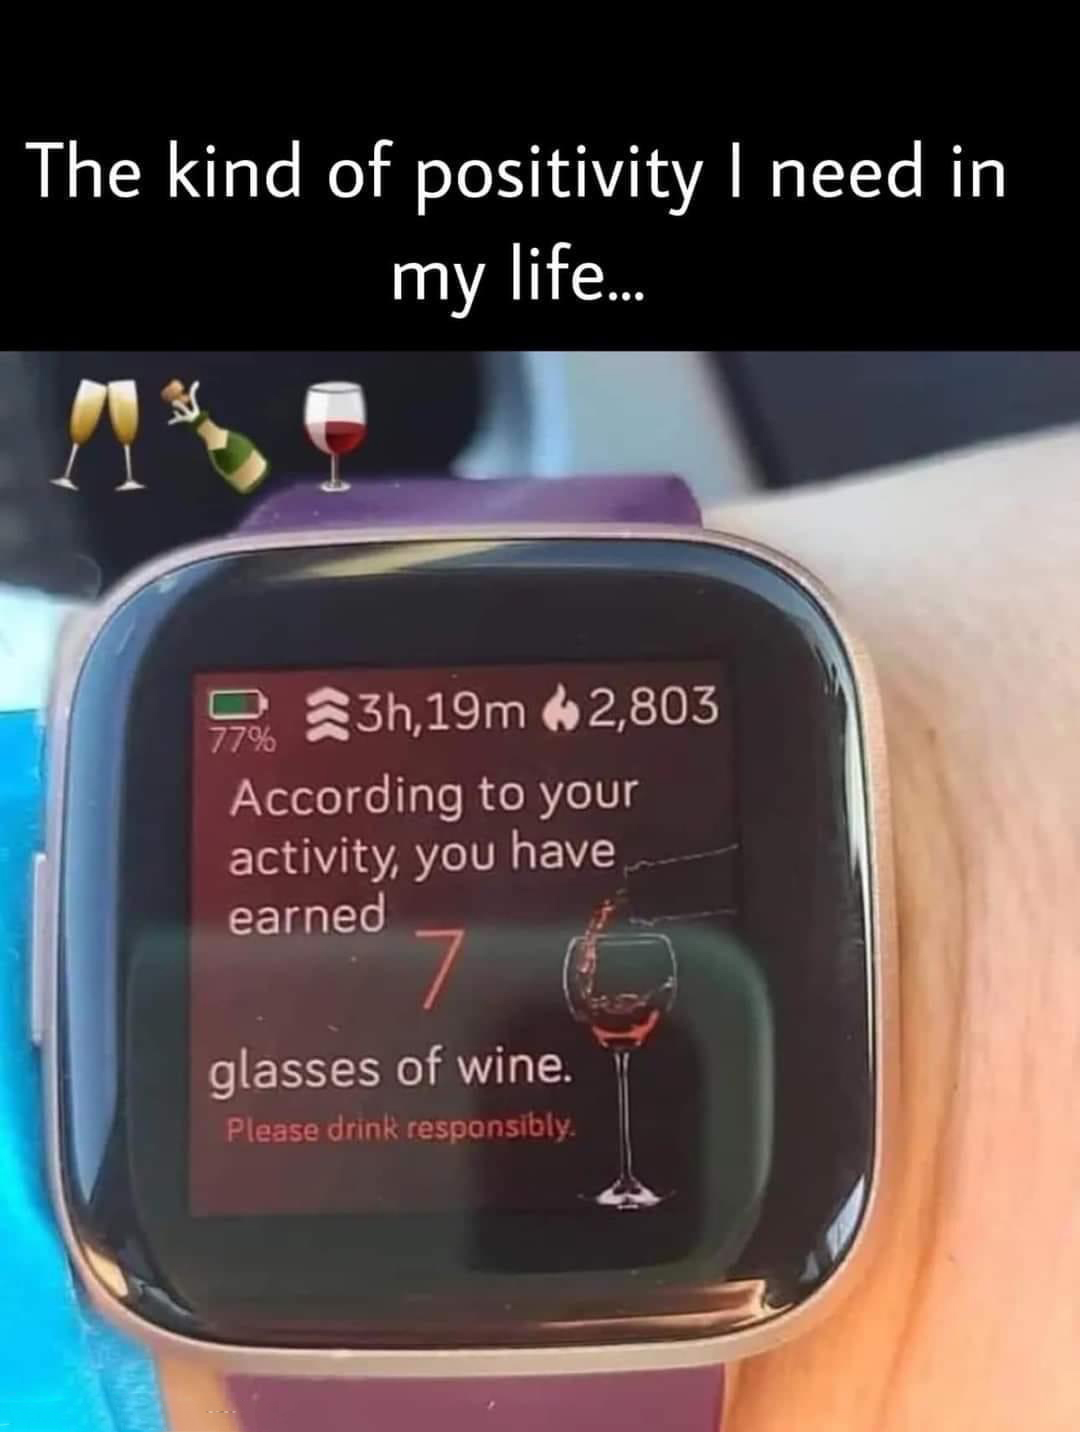 funny memes pics and tweets - Wine - The kind of positivity I need in my life.... 77% 3h,19m2,803 According to your activity, you have earned 7 glasses of wine. Please drink responsibly.